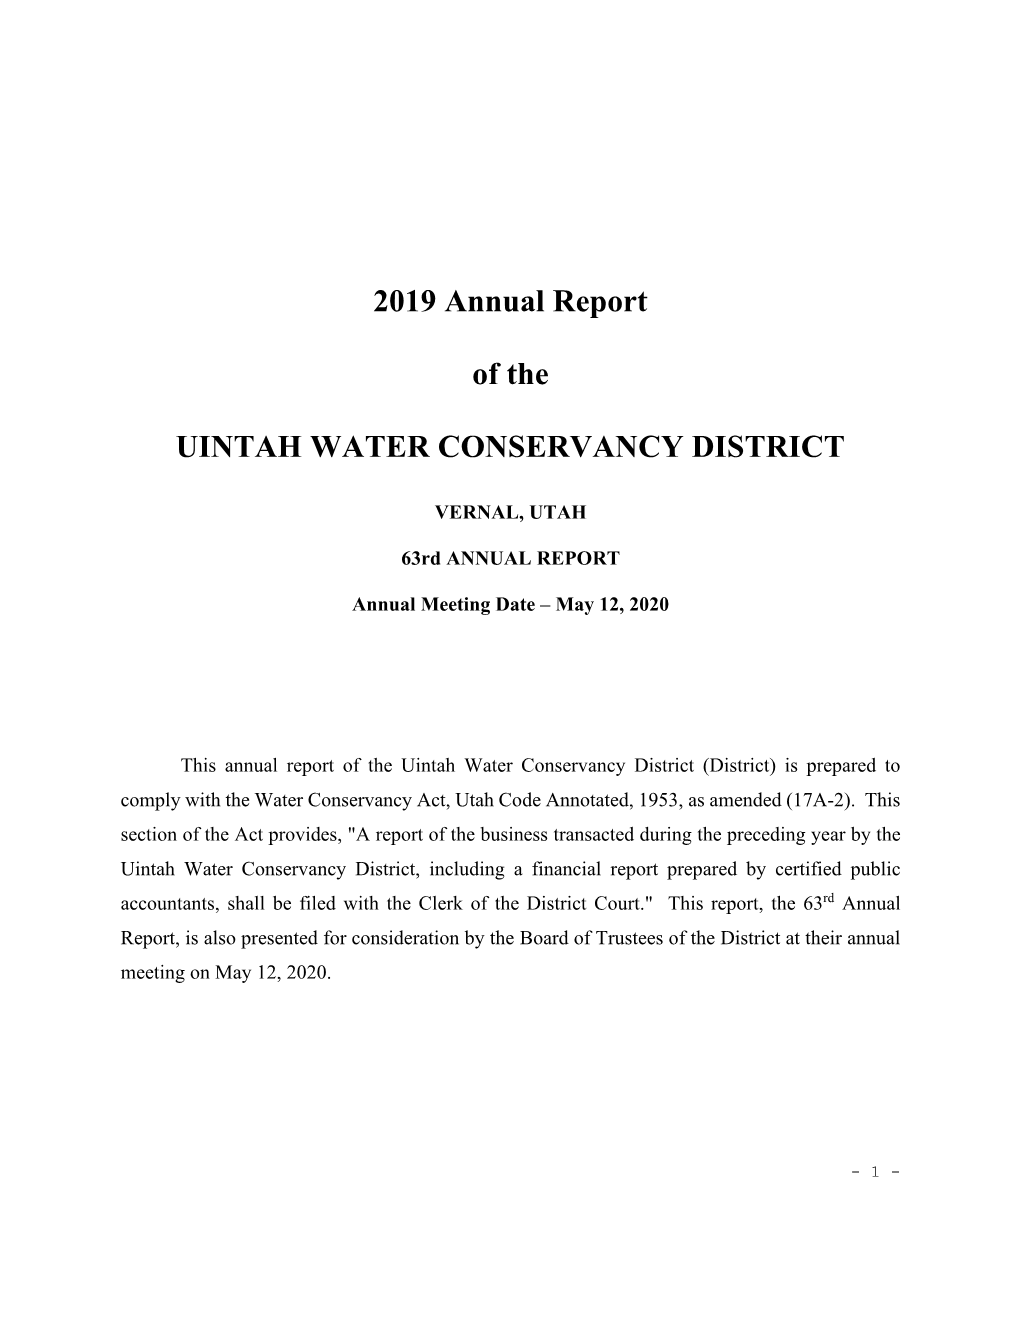 2019 Annual Report of the UINTAH WATER CONSERVANCY DISTRICT